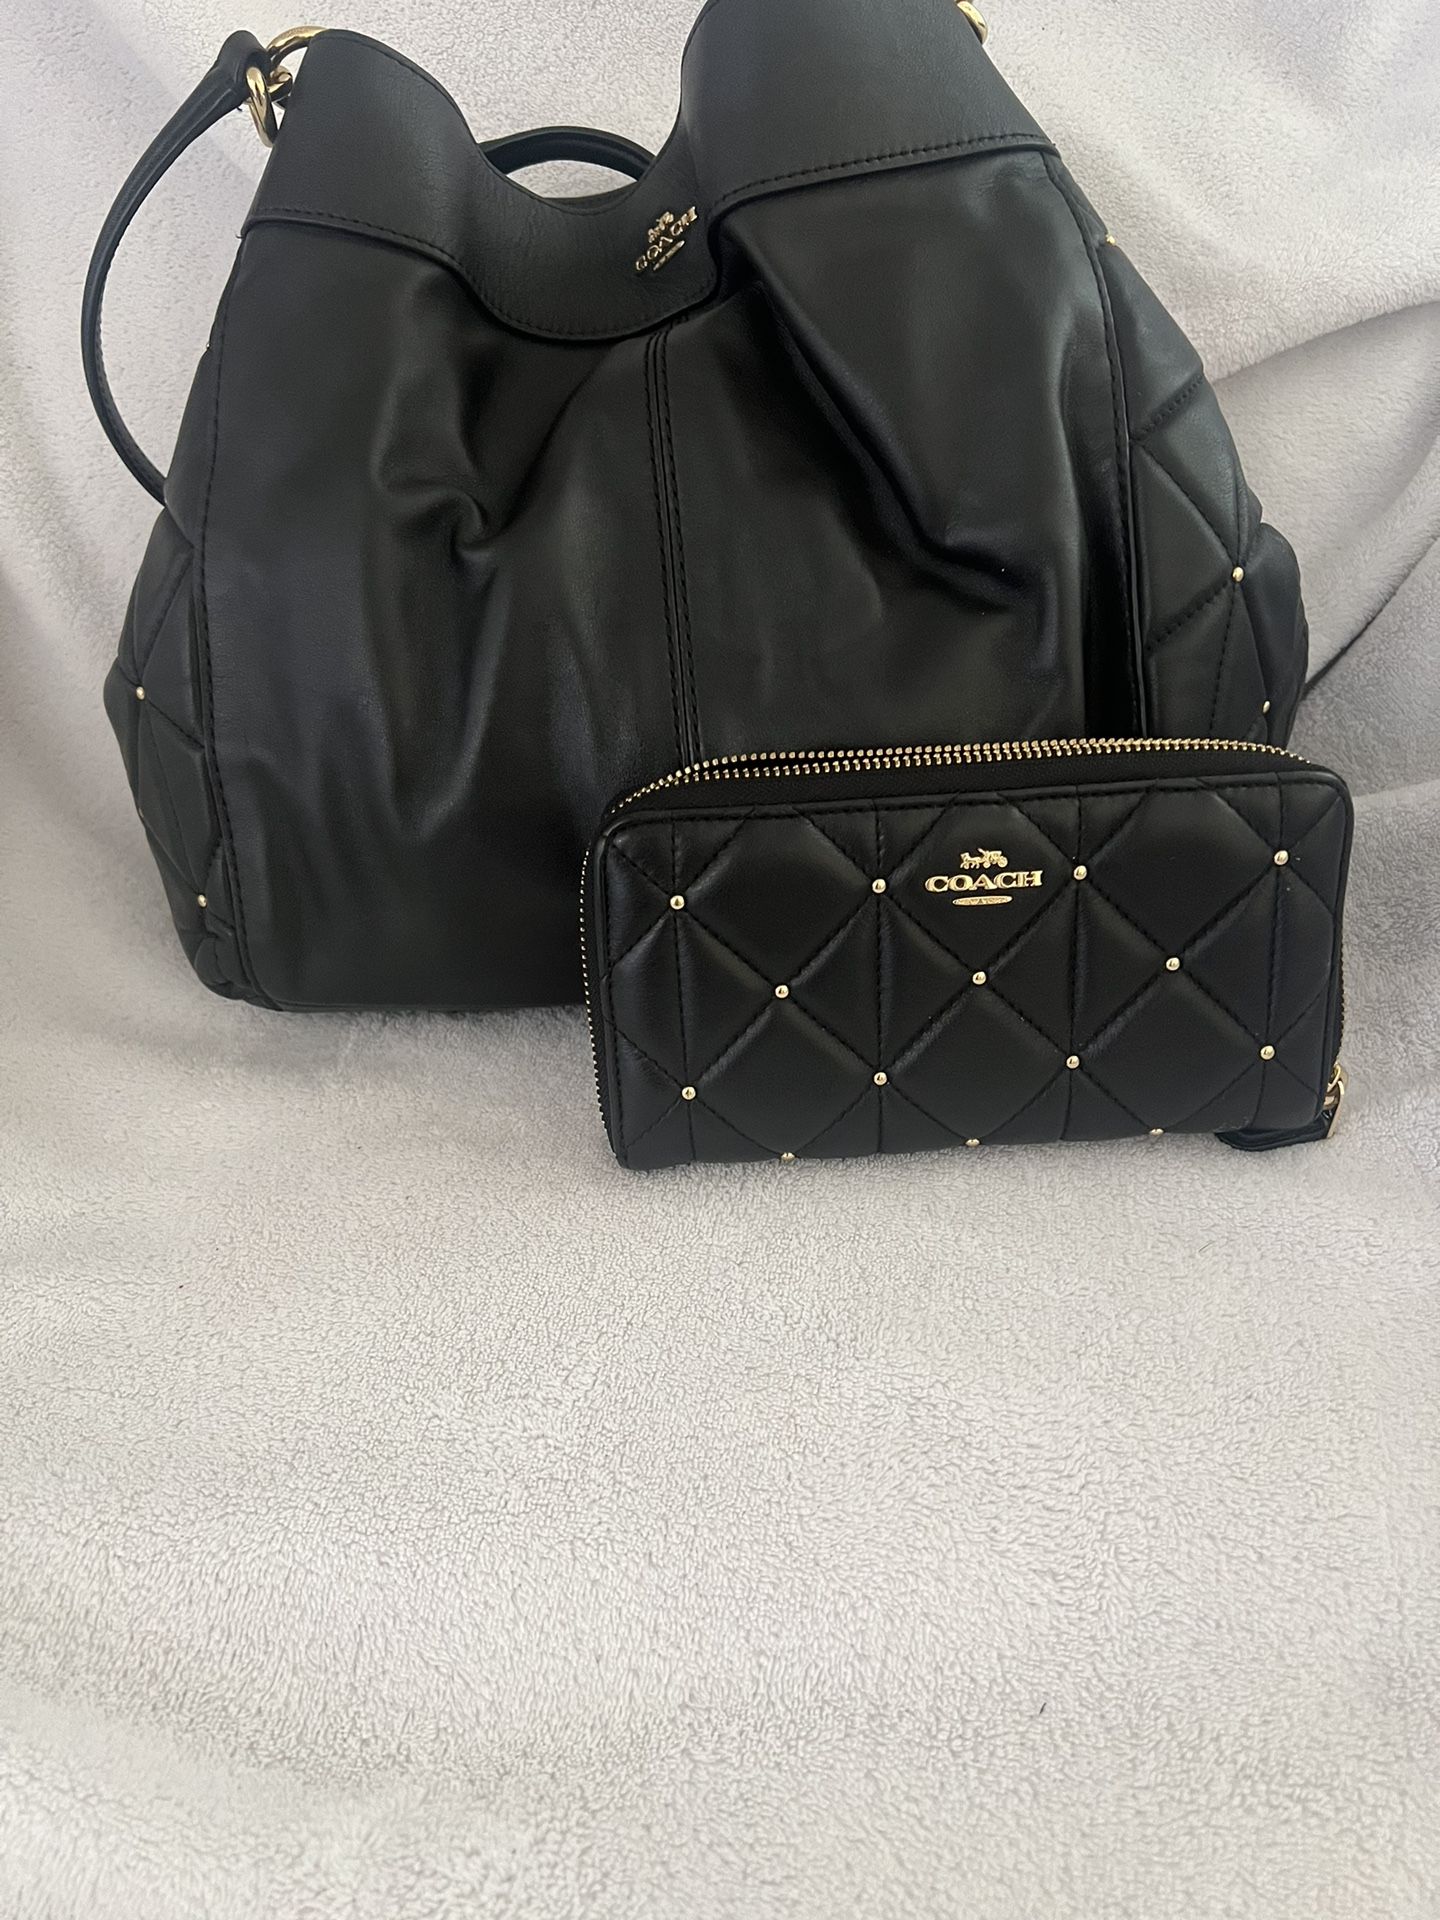 Coach Tote Quilted Bags Black With Wallet